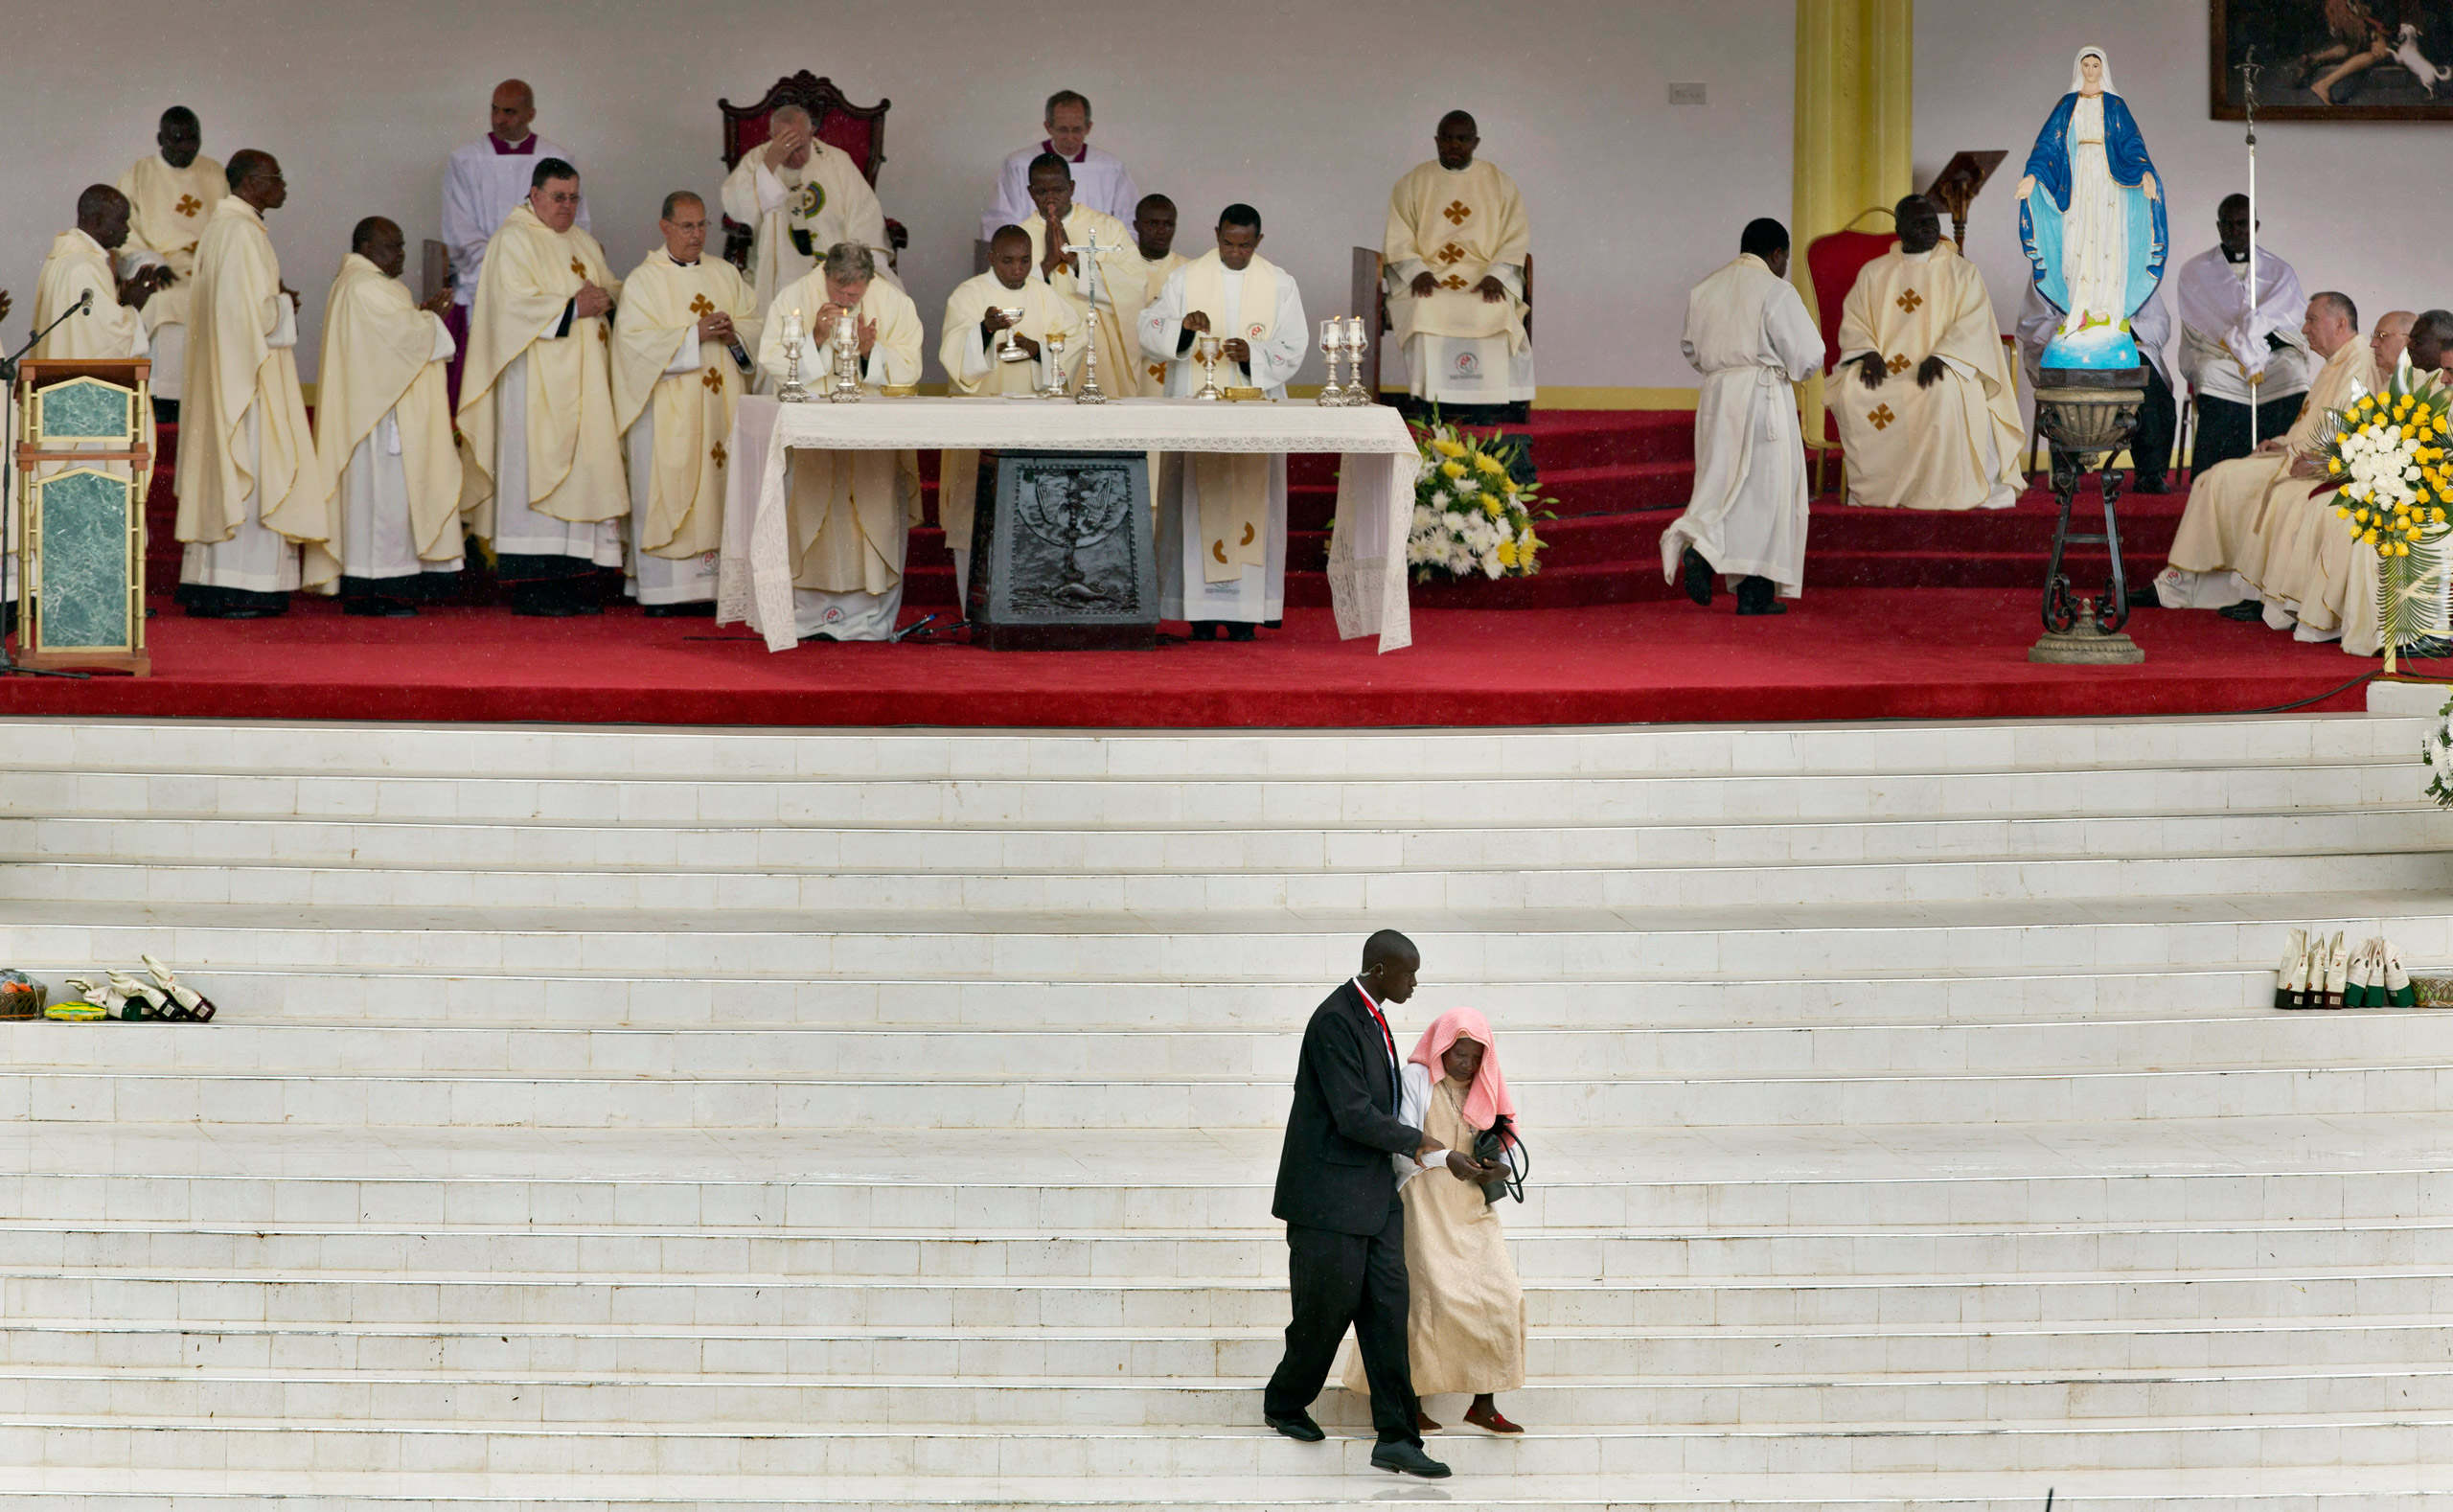 A security guard escorts a nun away after she tried to walk up the steps from the crowd to the altar as Pope Francis held a Mass at the campus of the University of Nairobi on Nov. 26, 2015.